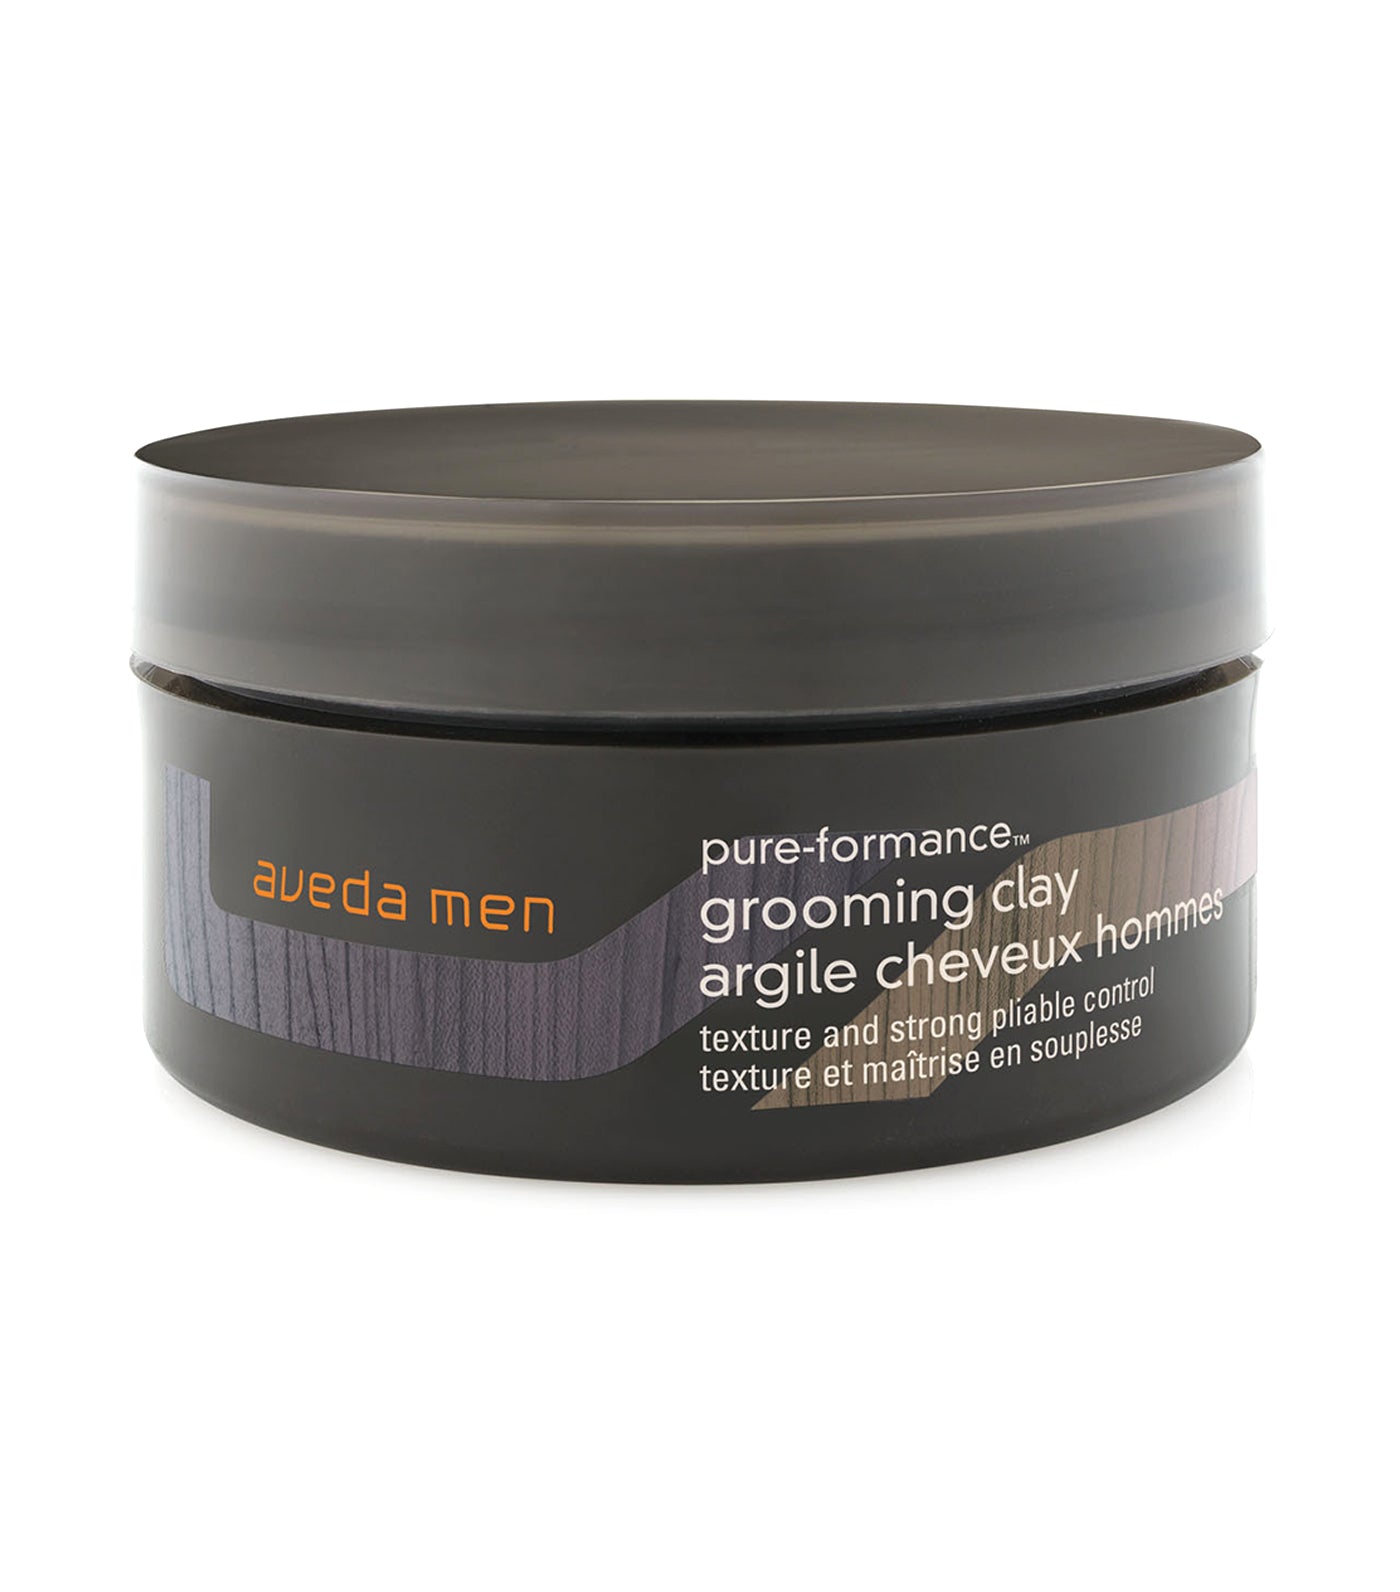 aveda men pure-formance™ Grooming Clay